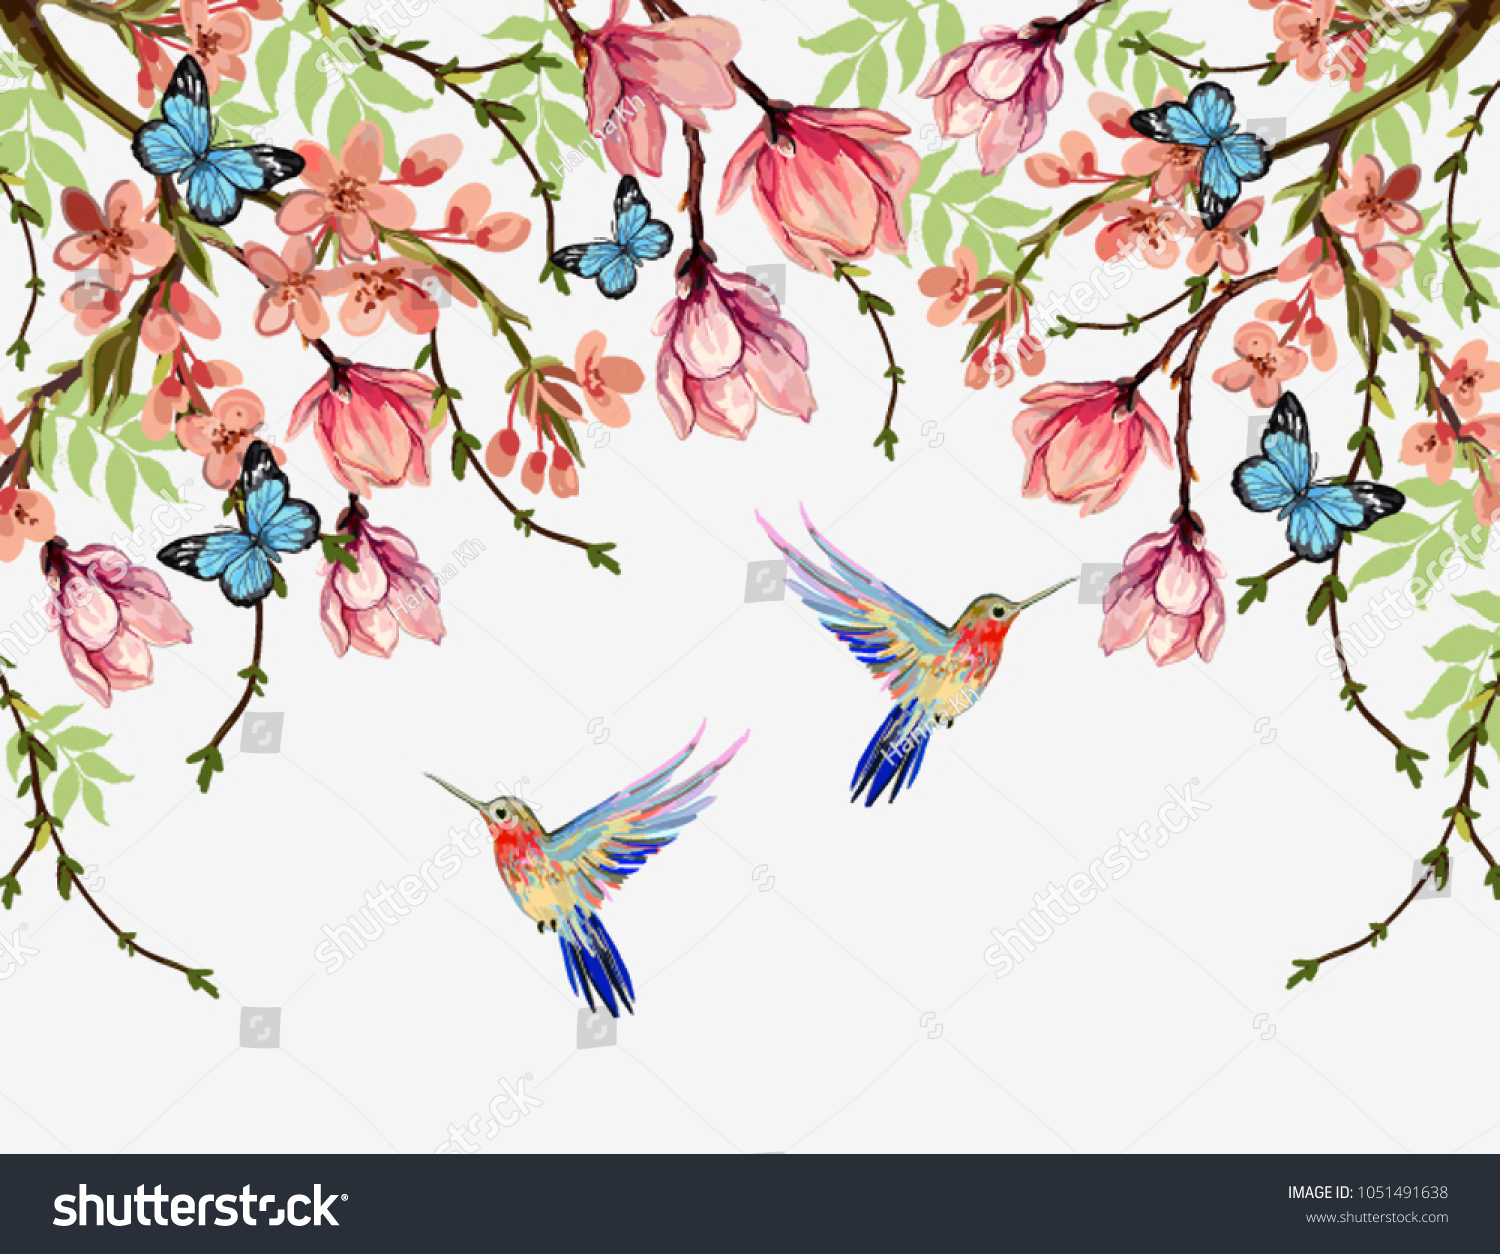 SVG of Beautiful  vector floral summer pattern background with tropical japanese flowers, wisteria, magnolia, butterflies, magnolia. Perfect for wallpapers, web page backgrounds, surface textures, textile. svg